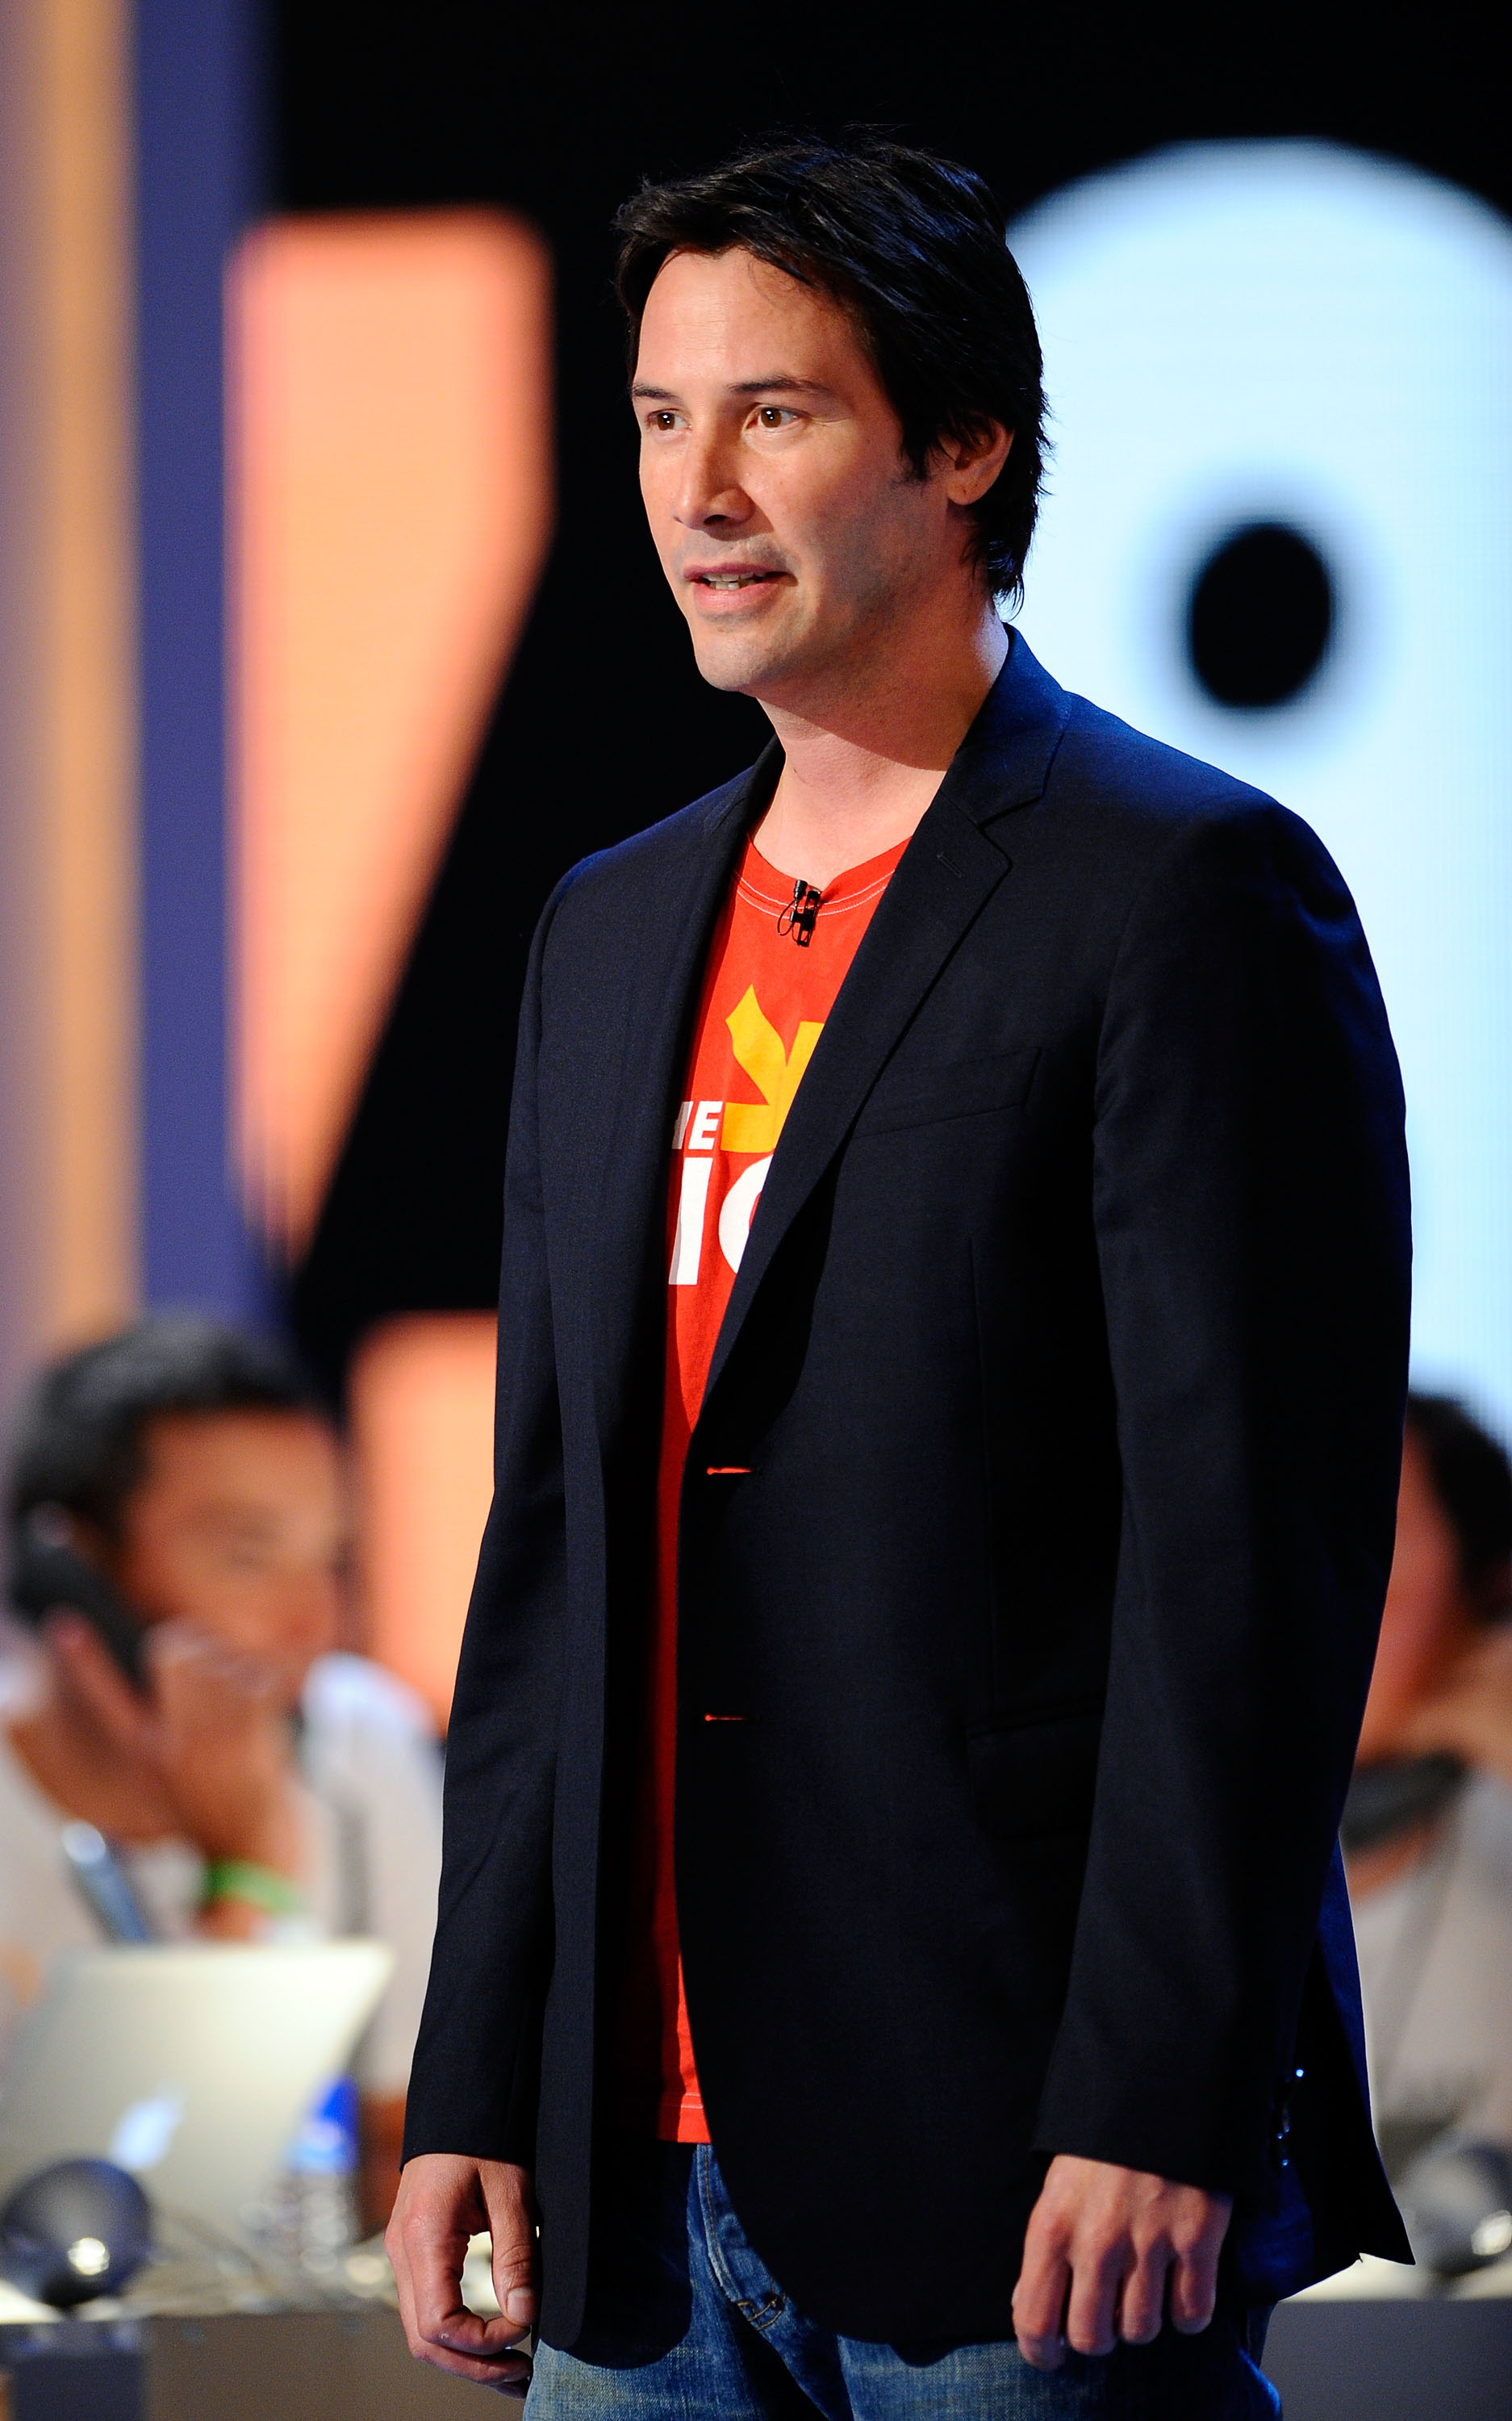 Keanu Reeves at the Stand Up To Cancer event in Hollywood on September 5, 2008. | Source: Getty Images